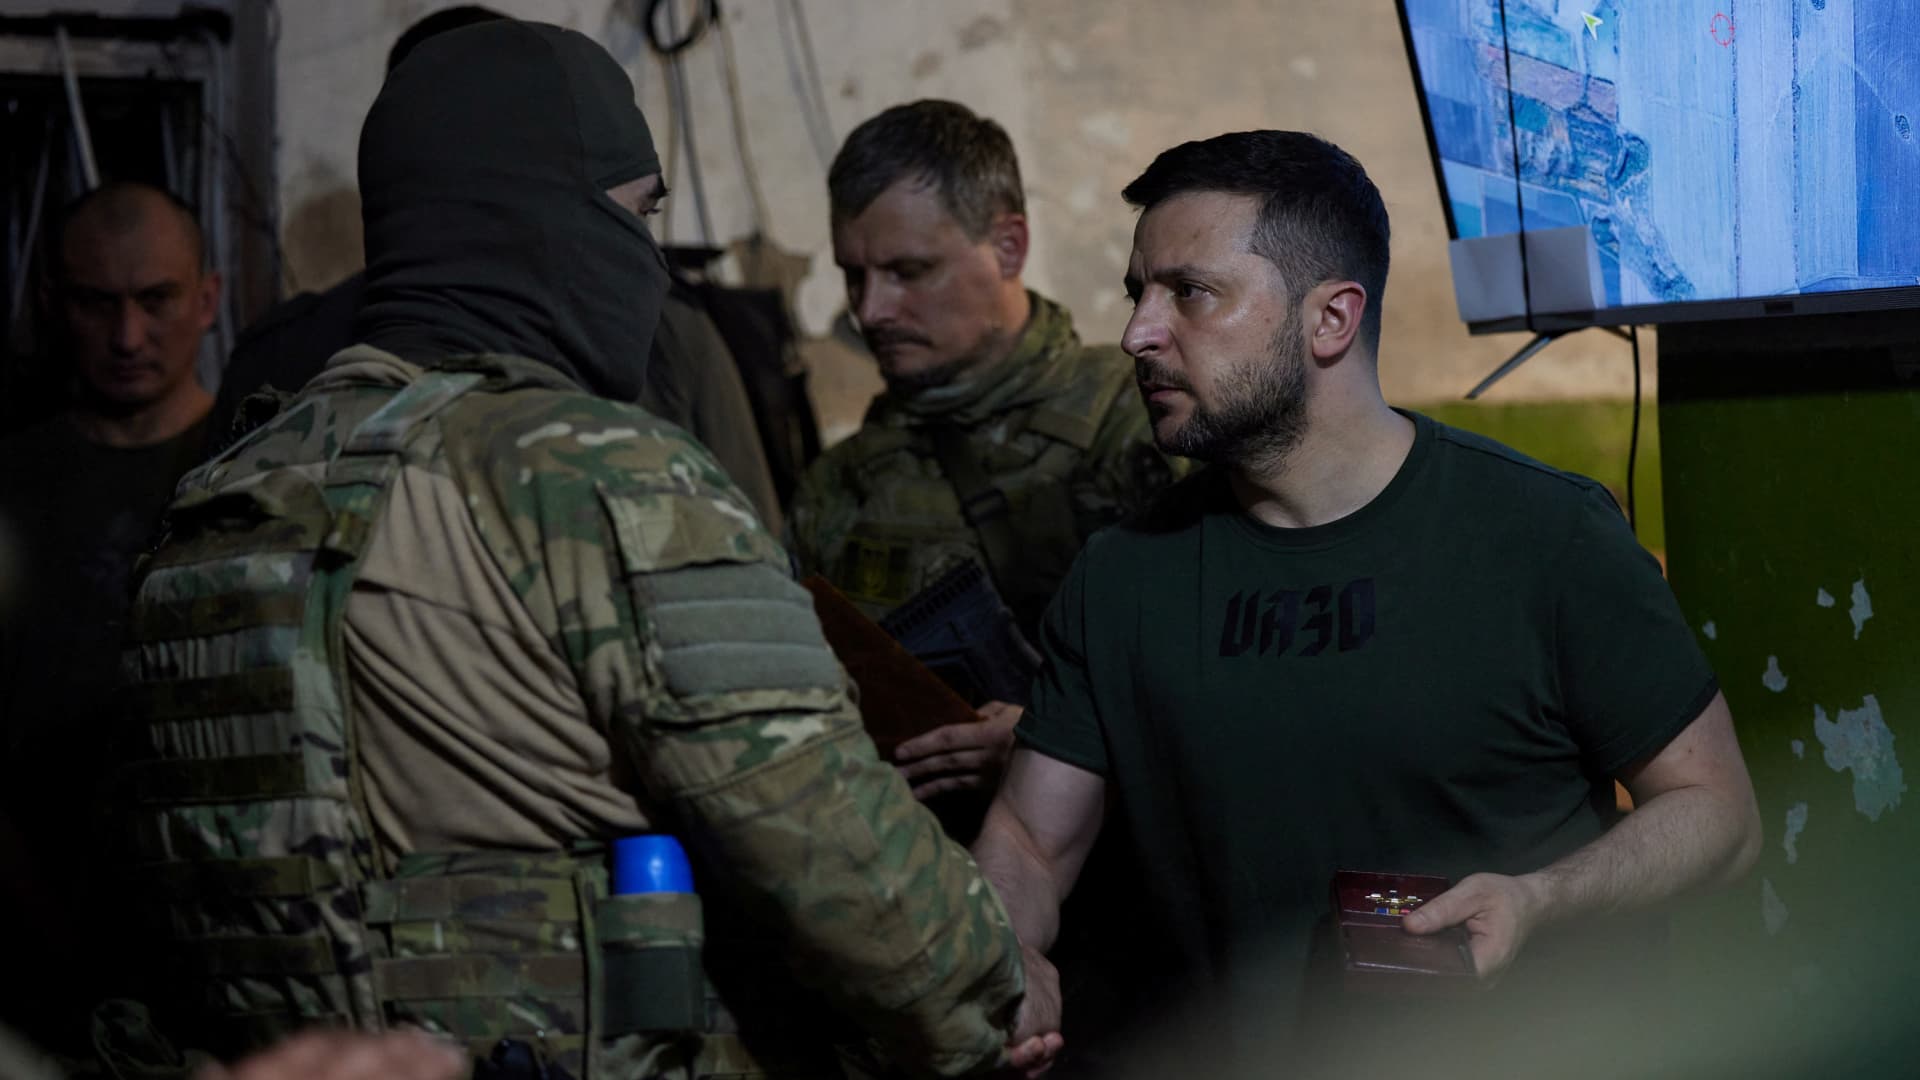 Ukraine's President Volodymyr Zelenskyy awards a soldier as he visits a position of Ukrainian service members, while Russia's attack on Ukraine continues, in Lysychansk, Luhansk region, Ukraine June 5, 2022.